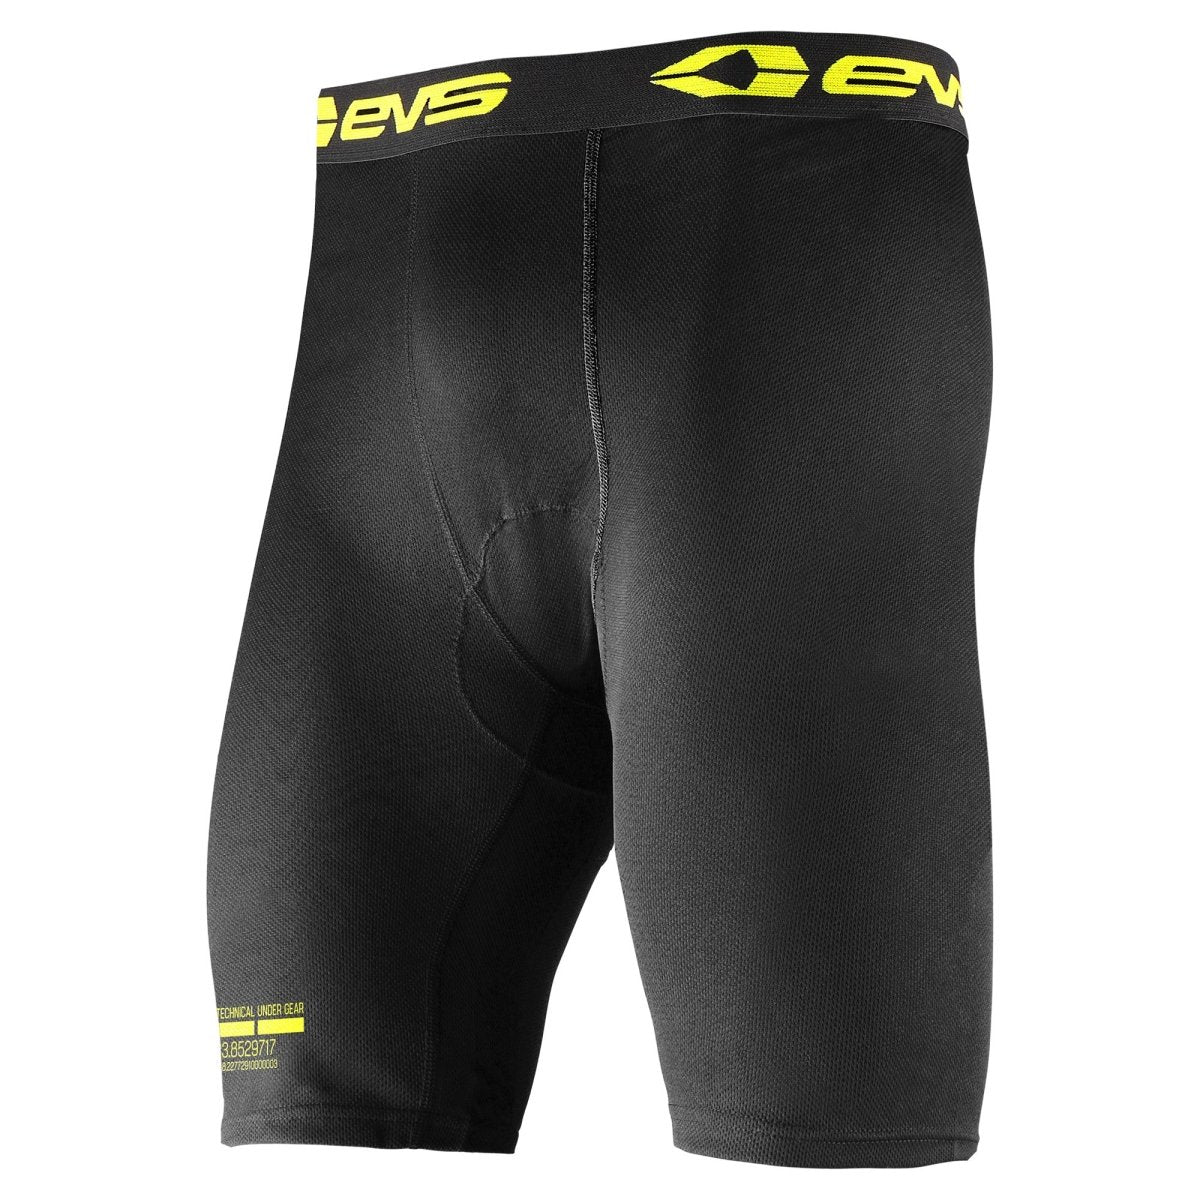 EVS - YOUTH VENTED SHORTS - 663-4255YM - 680196778732